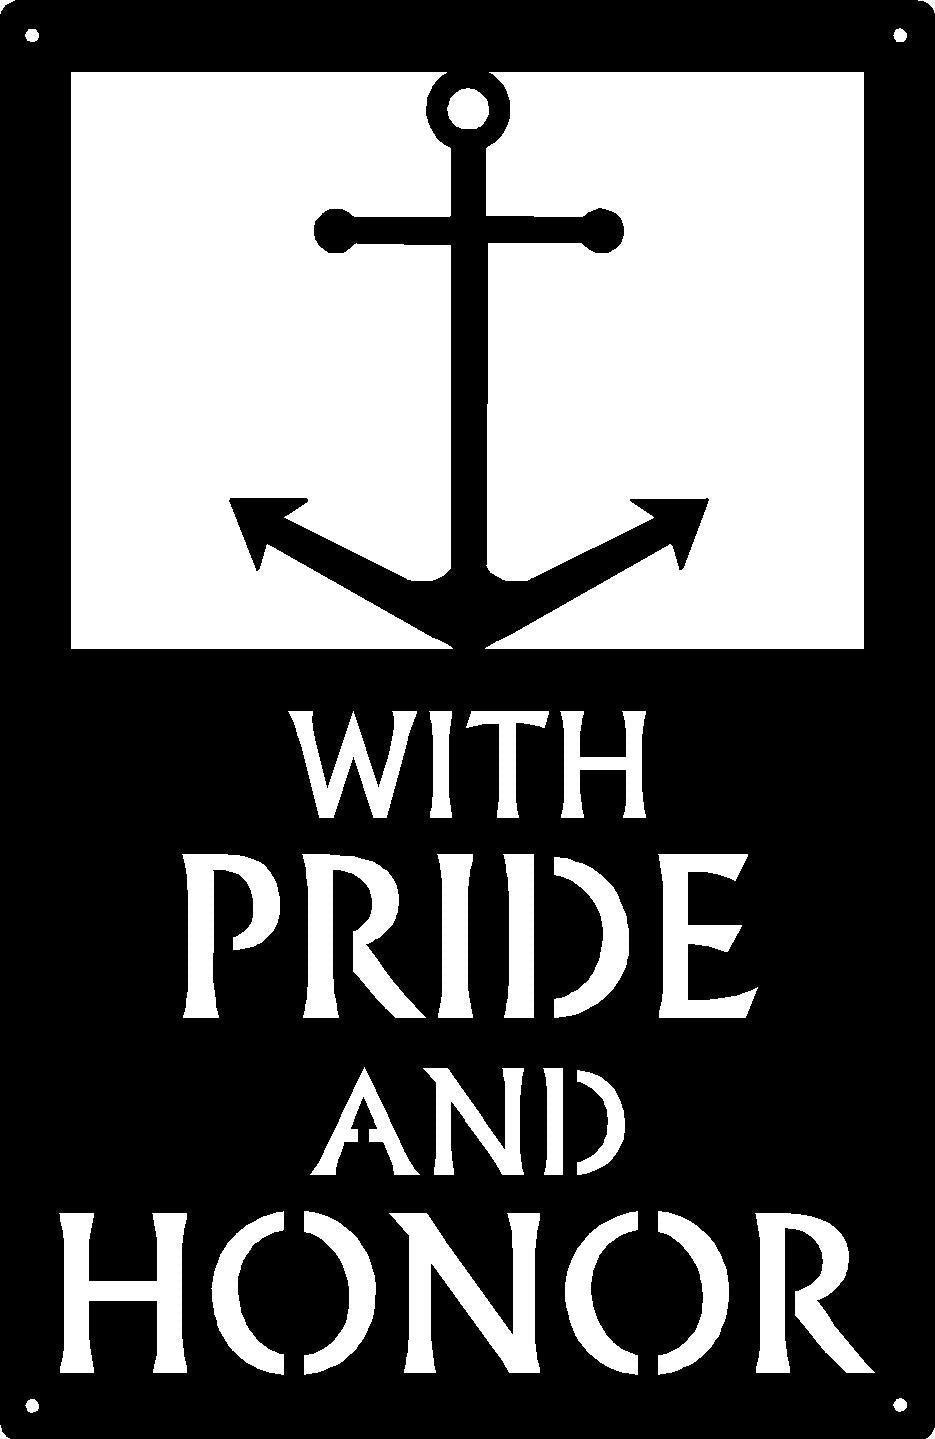 Pride and Honor Navy - Military Sign - The Metal Peddler  military, navy